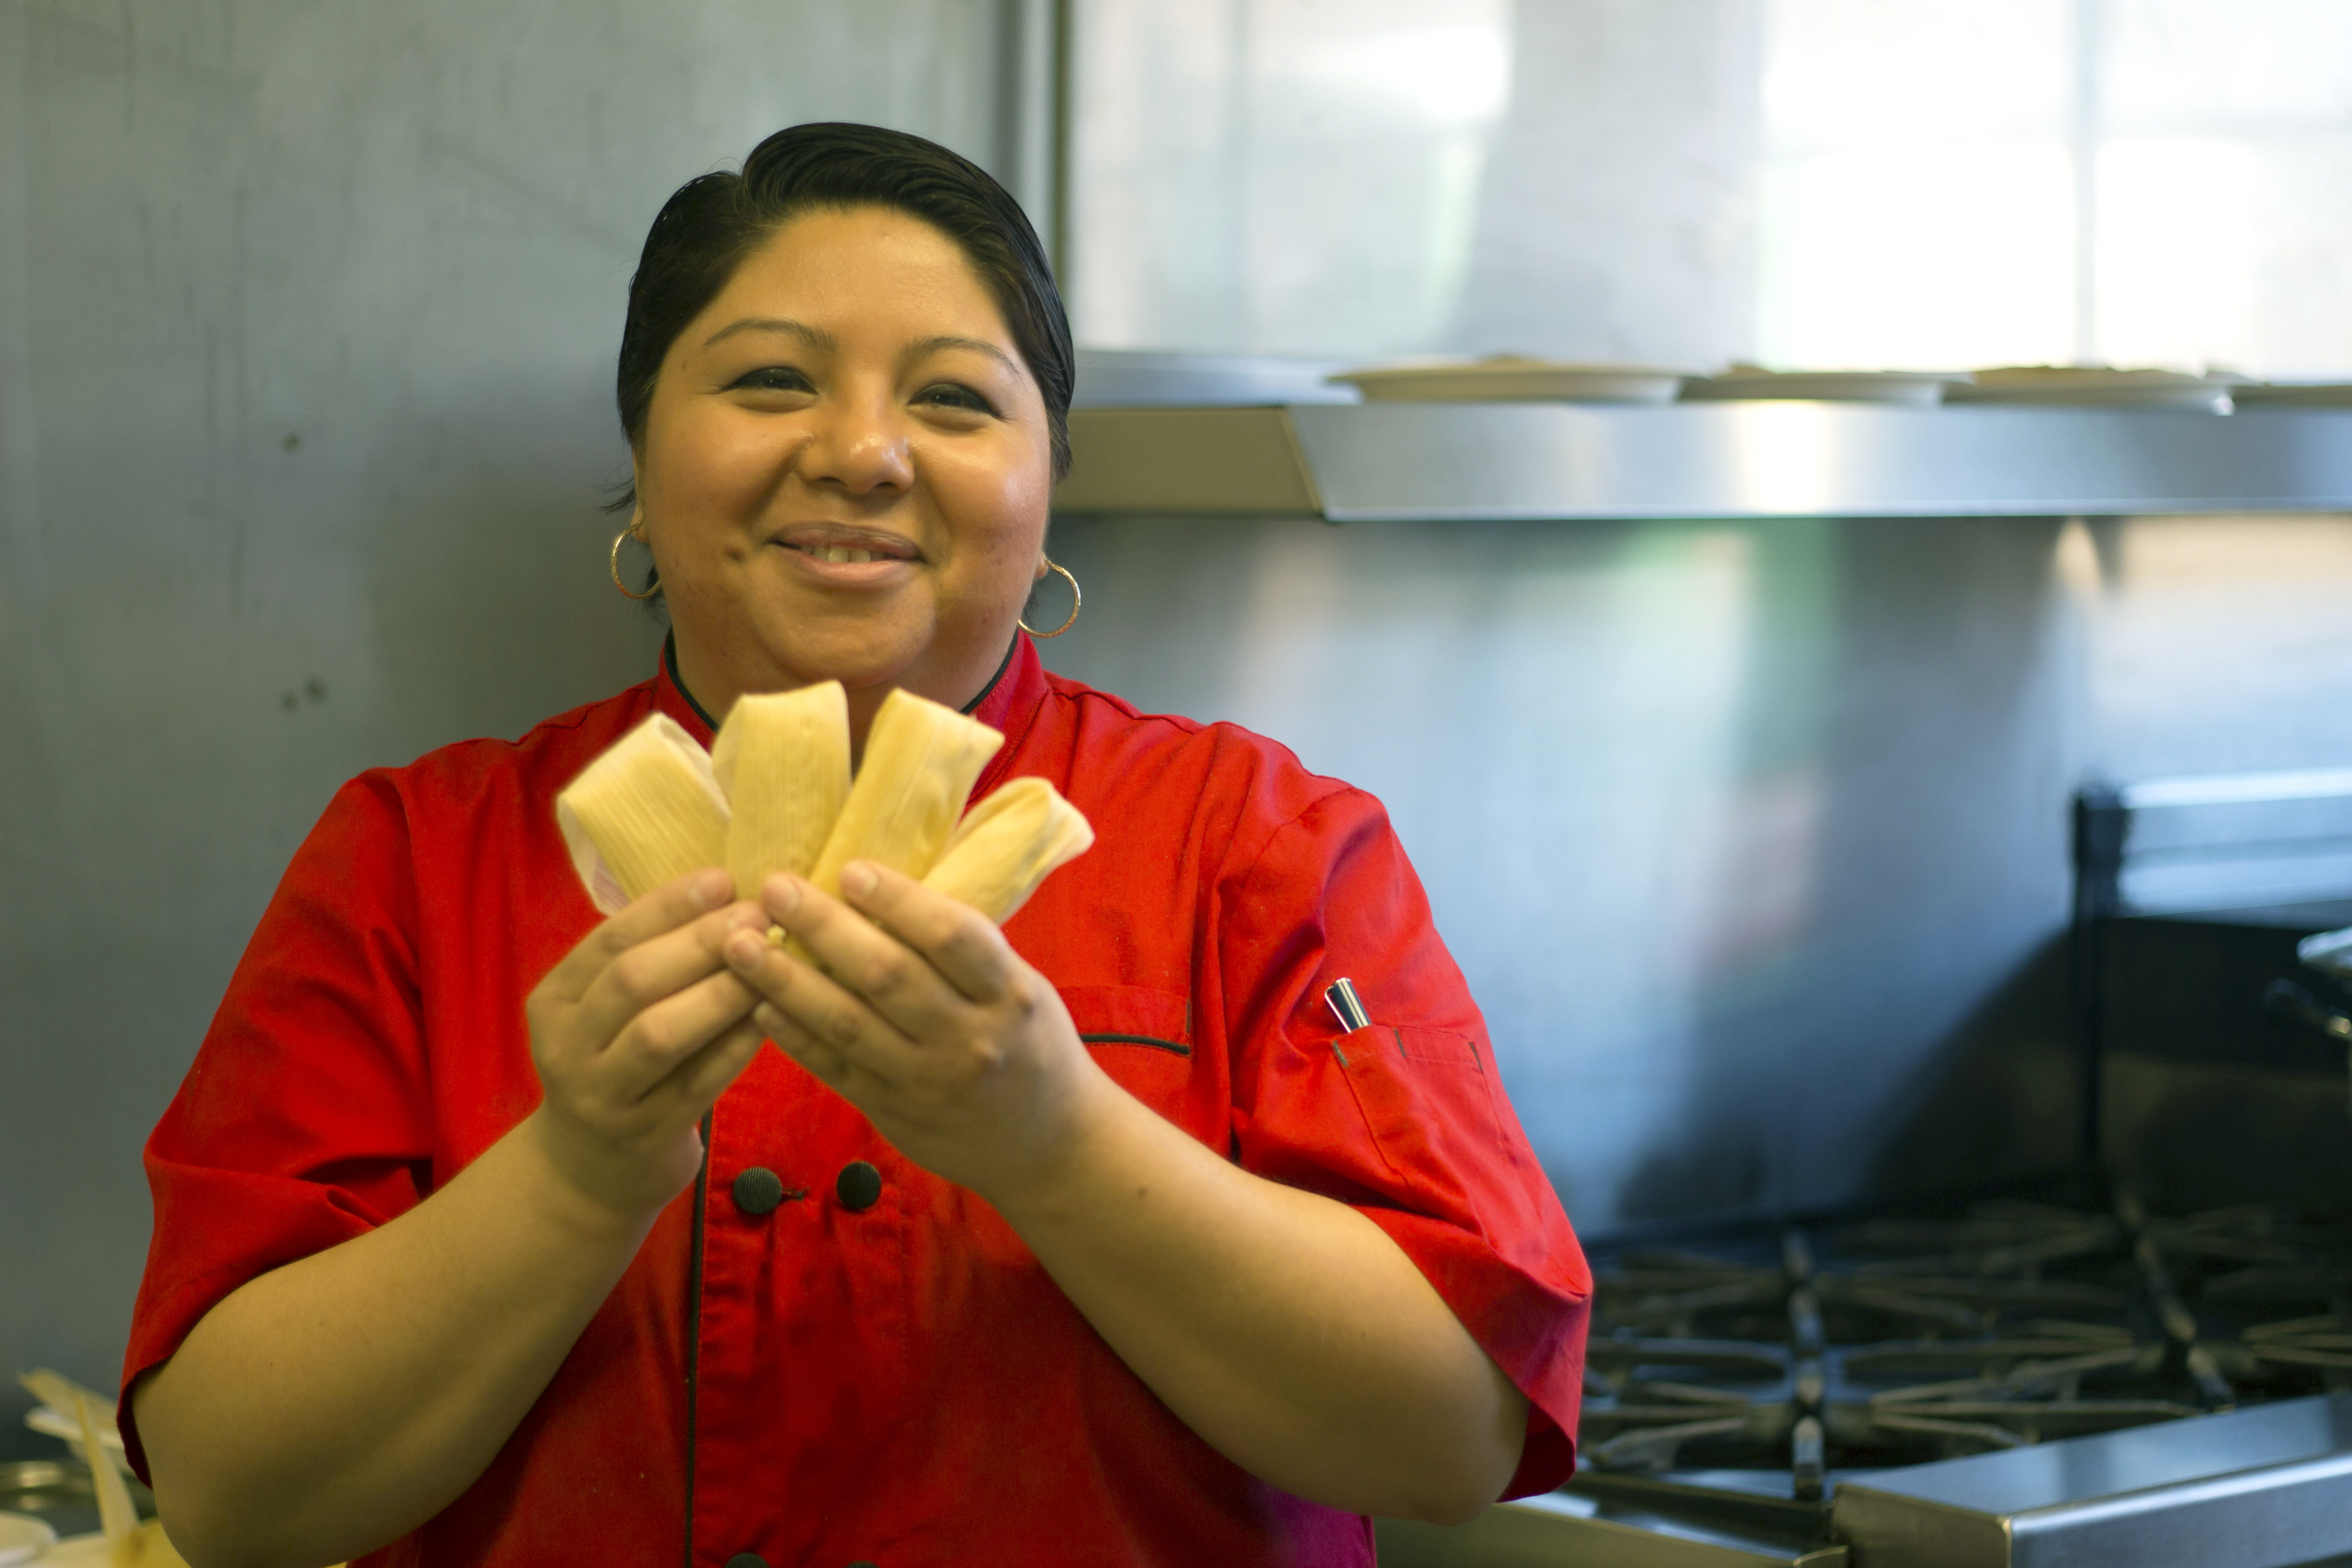 Bautista shares her family’s tamale recipe.